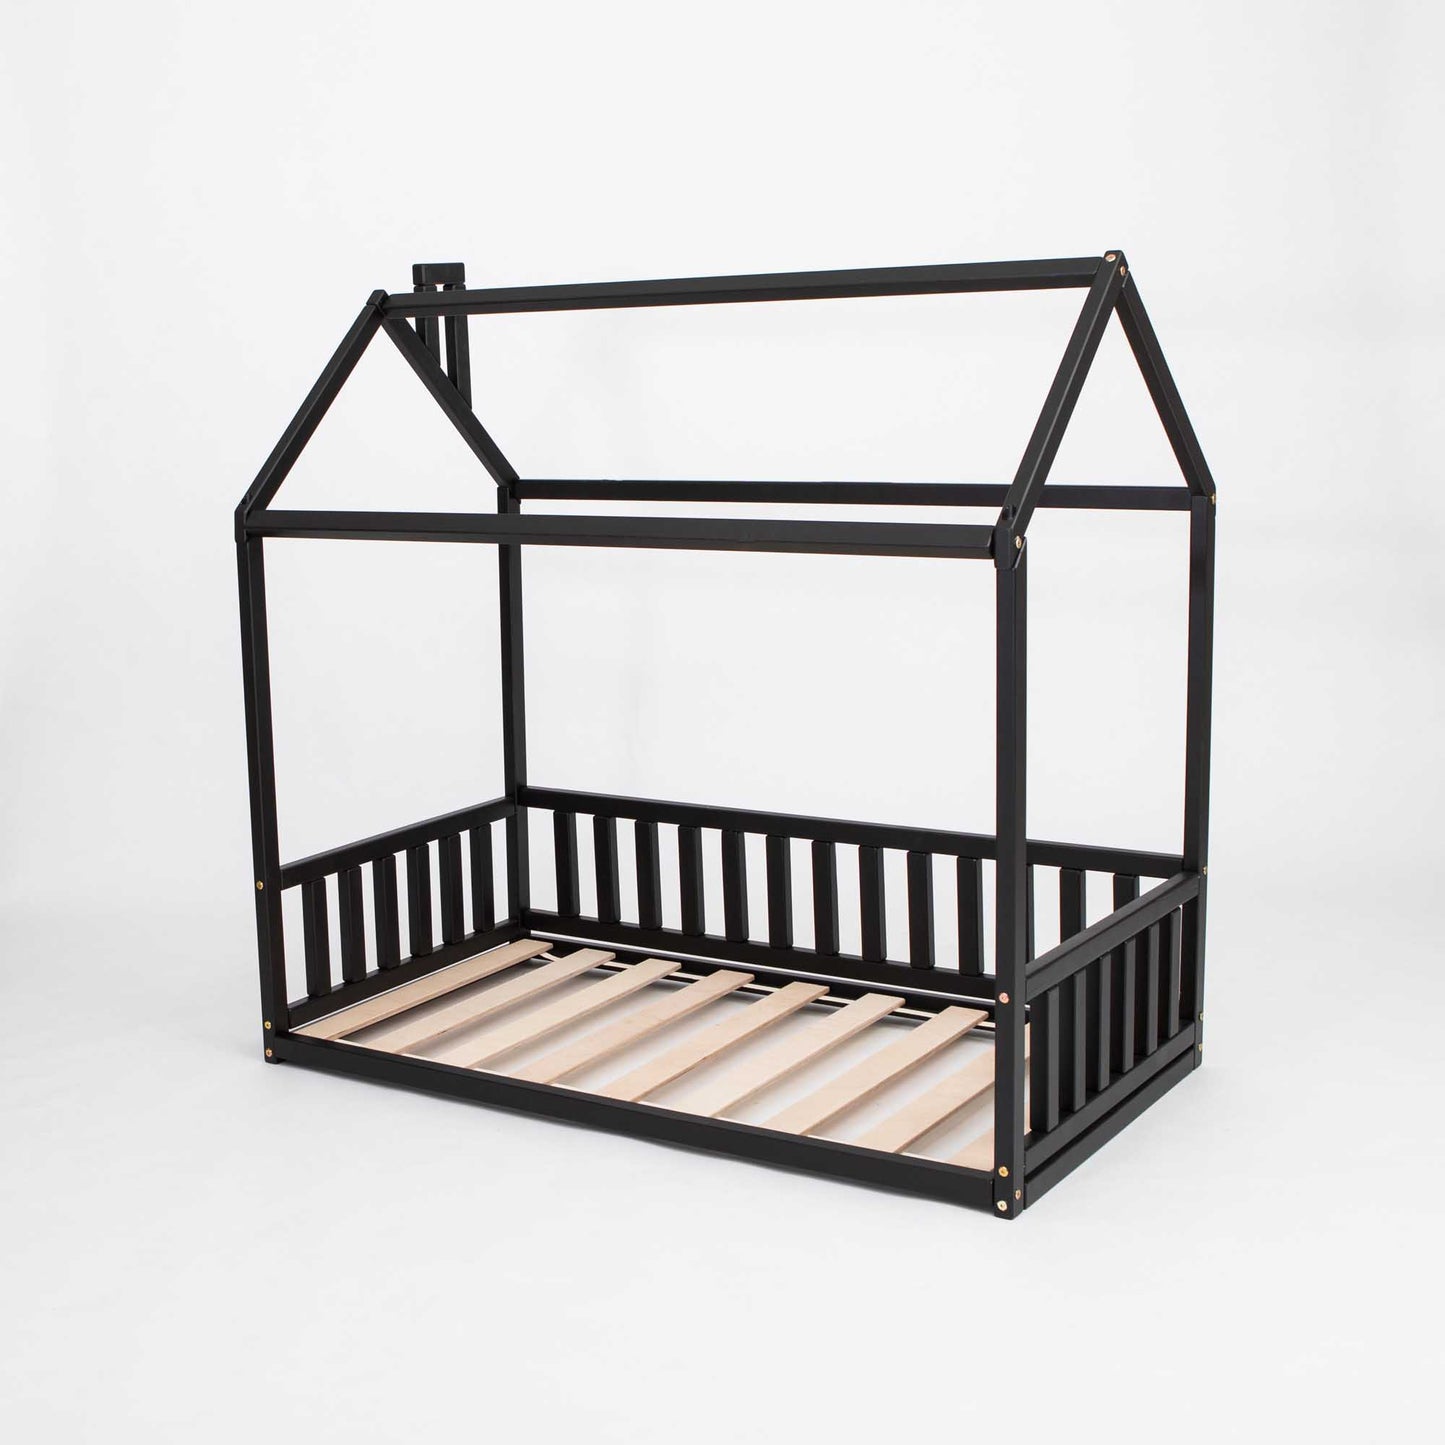 A cozy sleep haven with a wooden slatted frame, the Sweet Home From Wood Kids' House-Frame Bed with 3-sided rails is made of black wood, perfect for preschoolers.